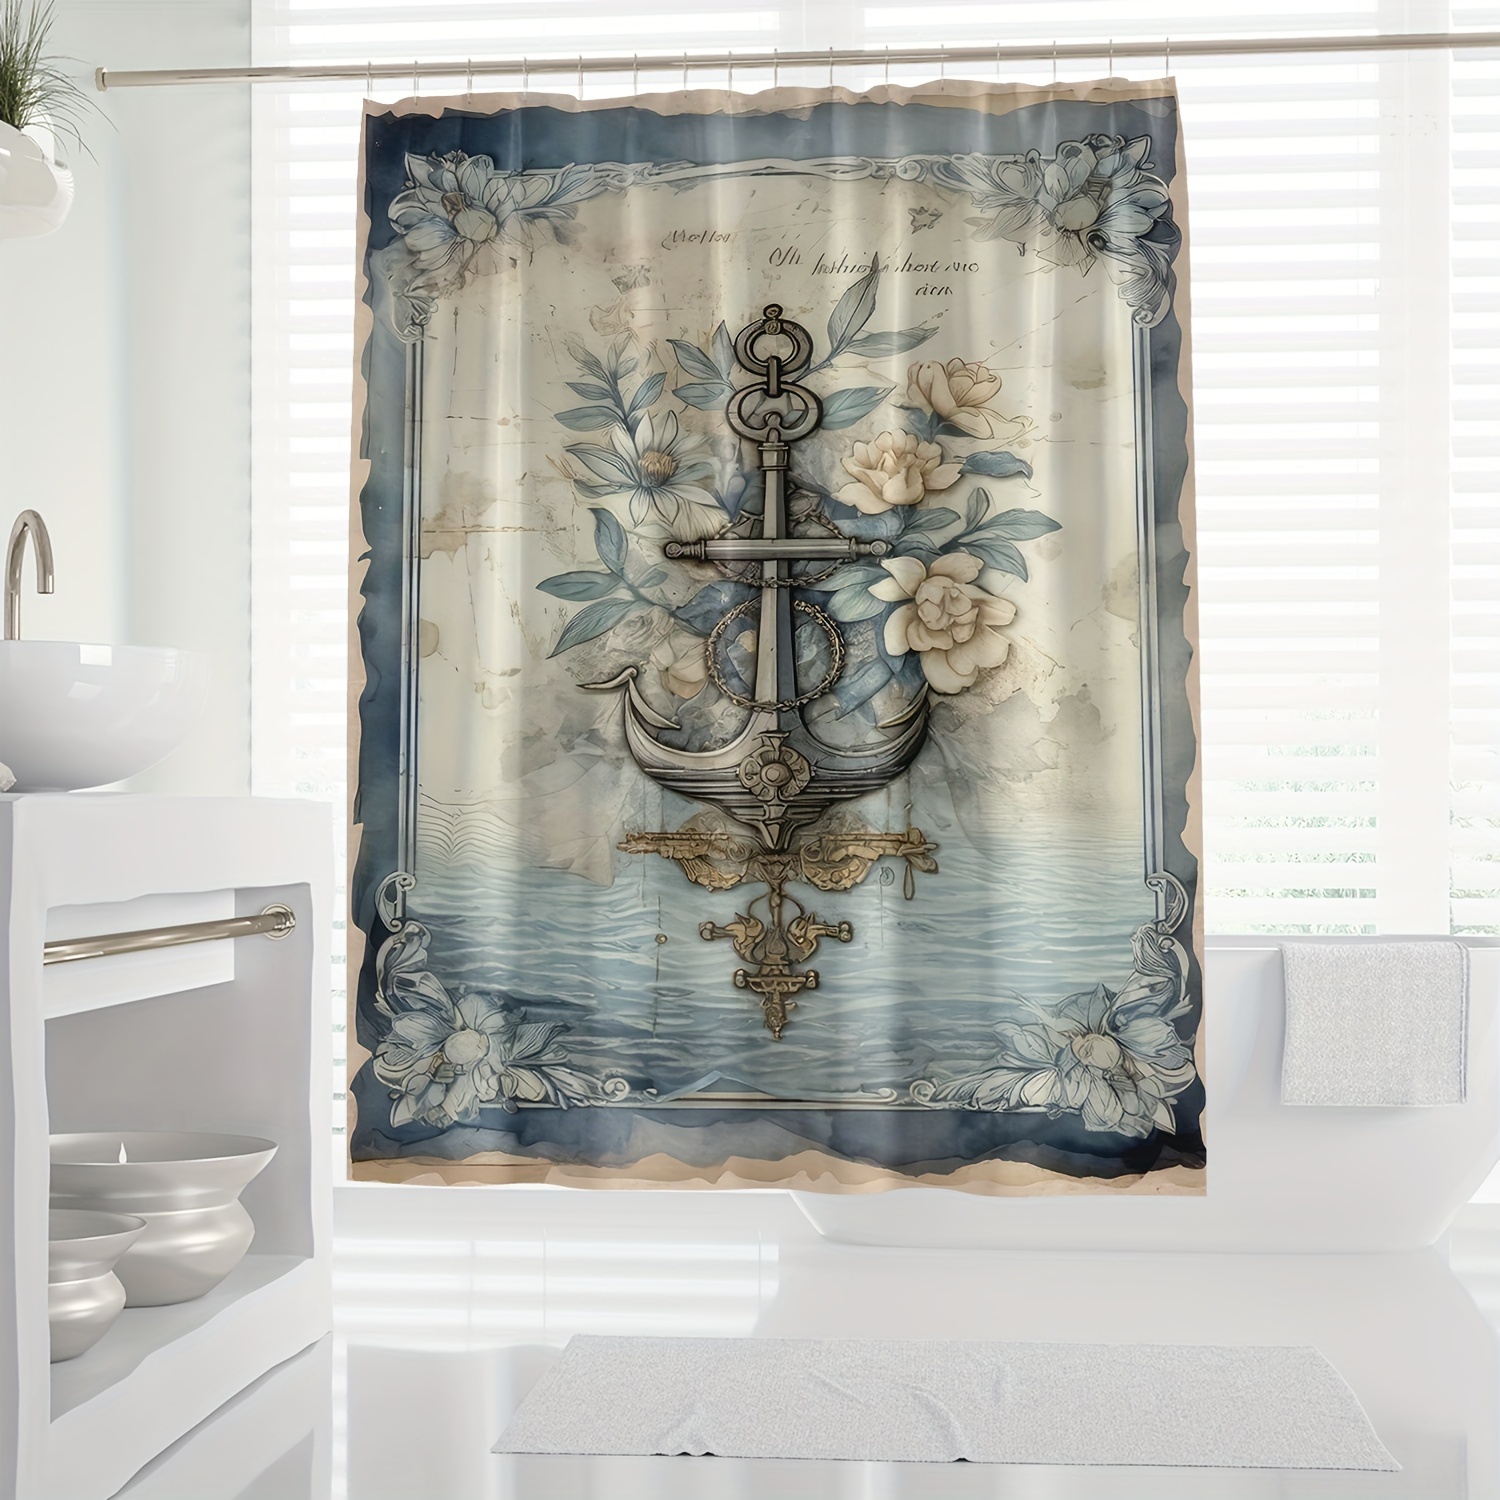 

Waterproof Nautical Anchor Shower Curtain With Hooks - Machine Washable Polyester, Artistic Ocean Theme Bathroom Decor